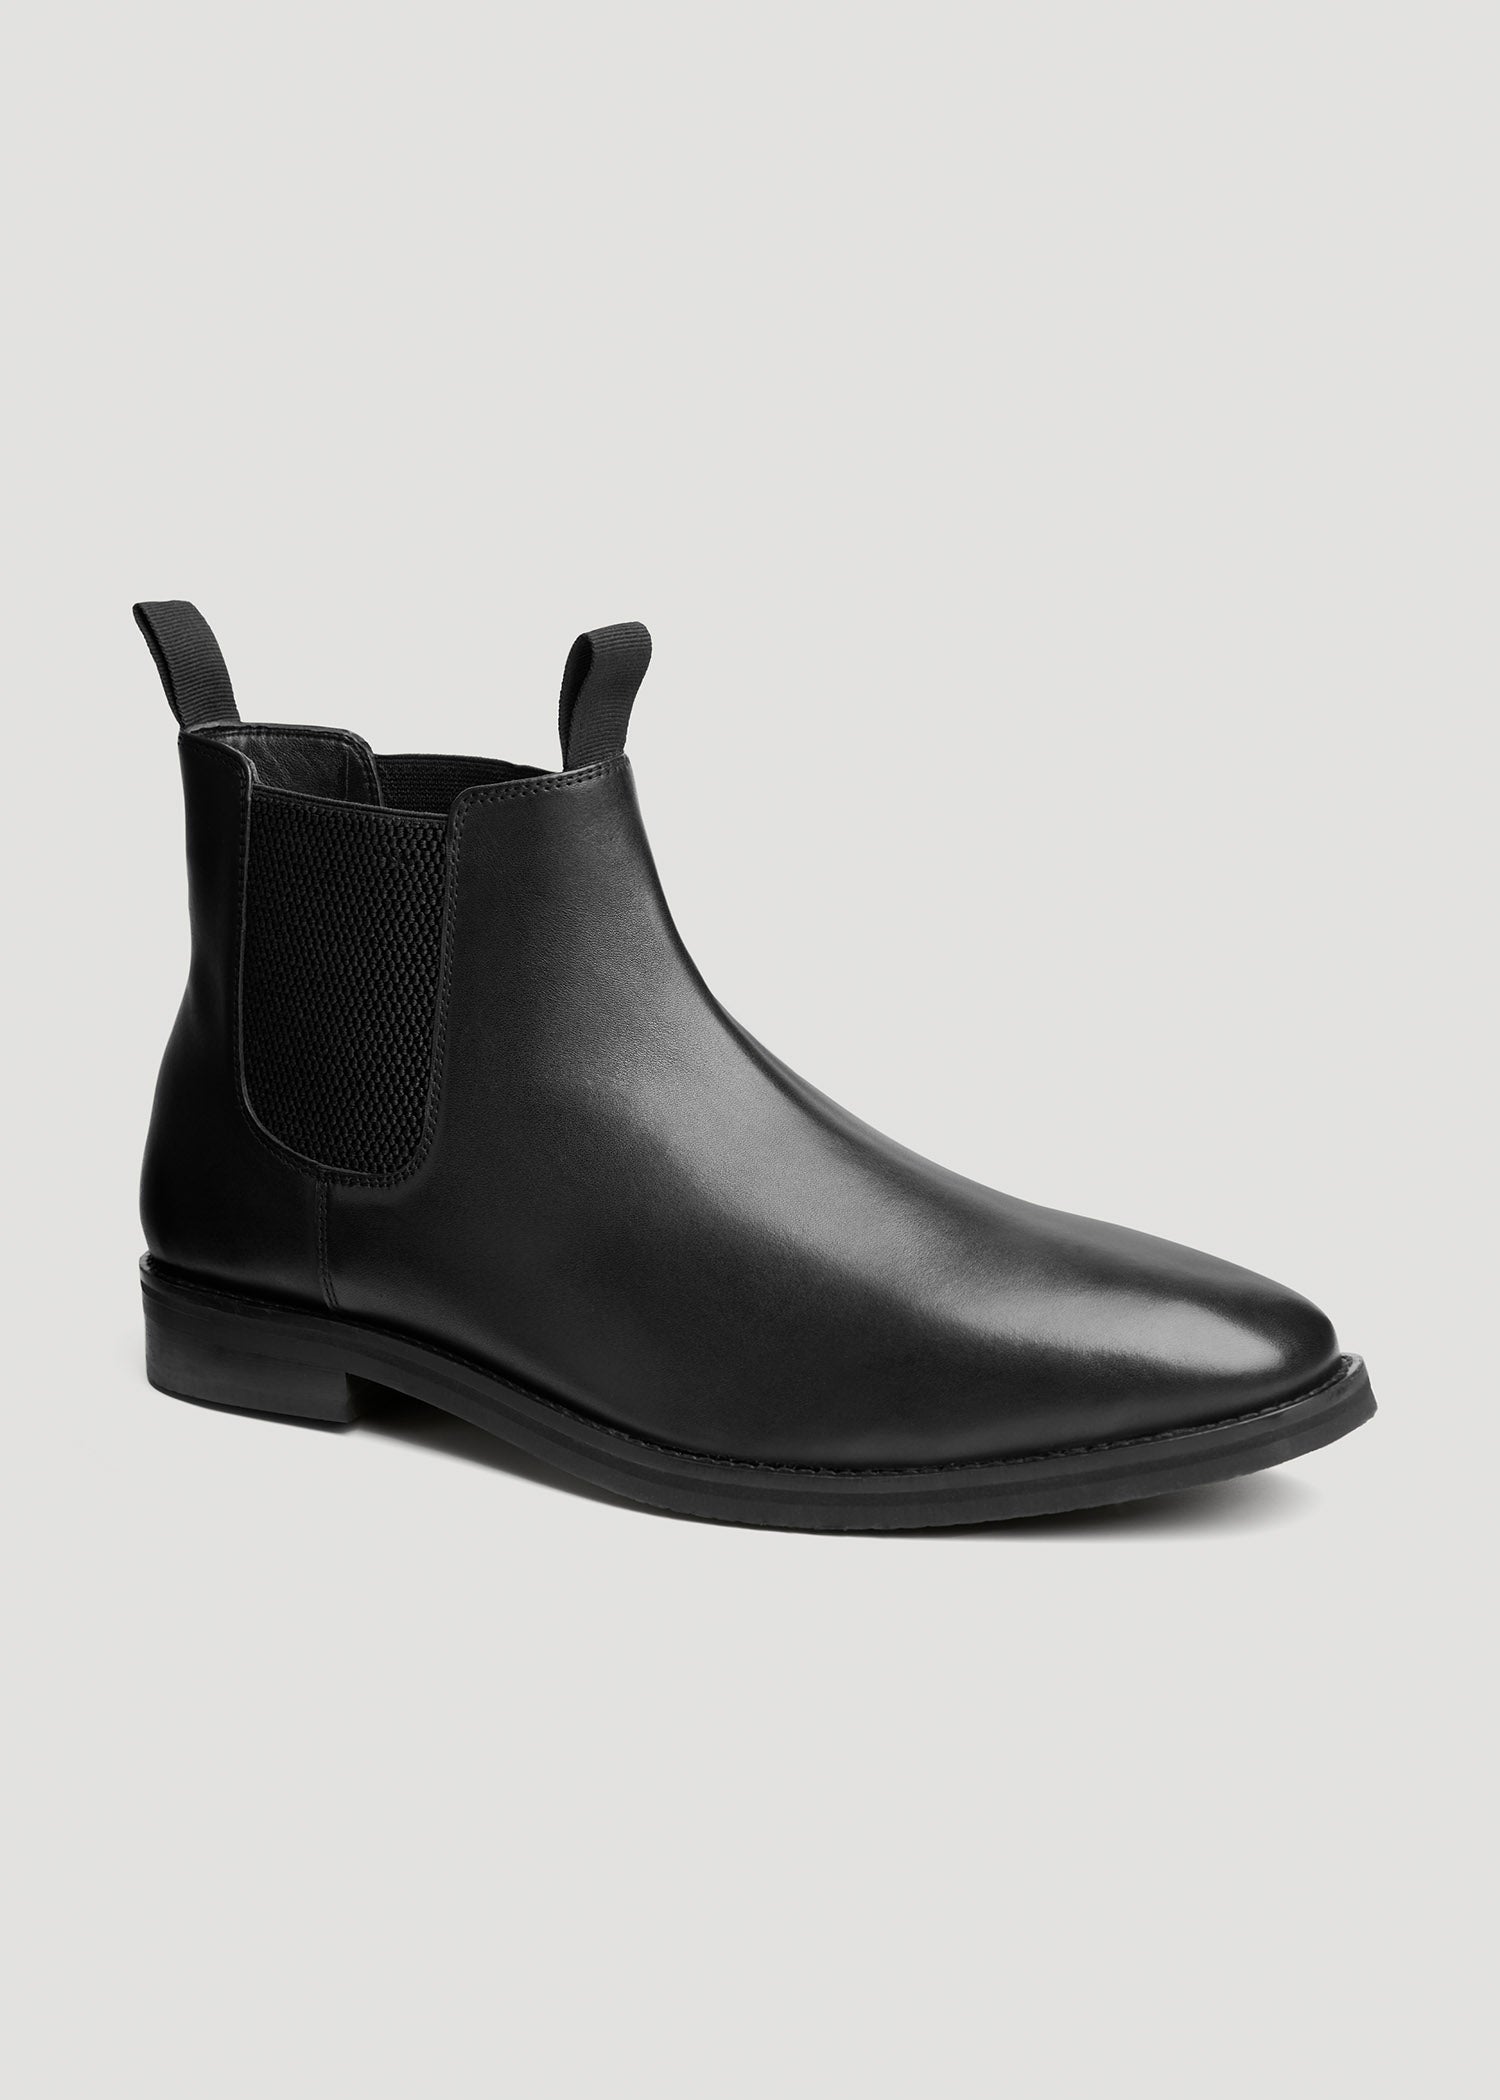 Size 13 to 15 Leather Chelsea Boot by American Tall